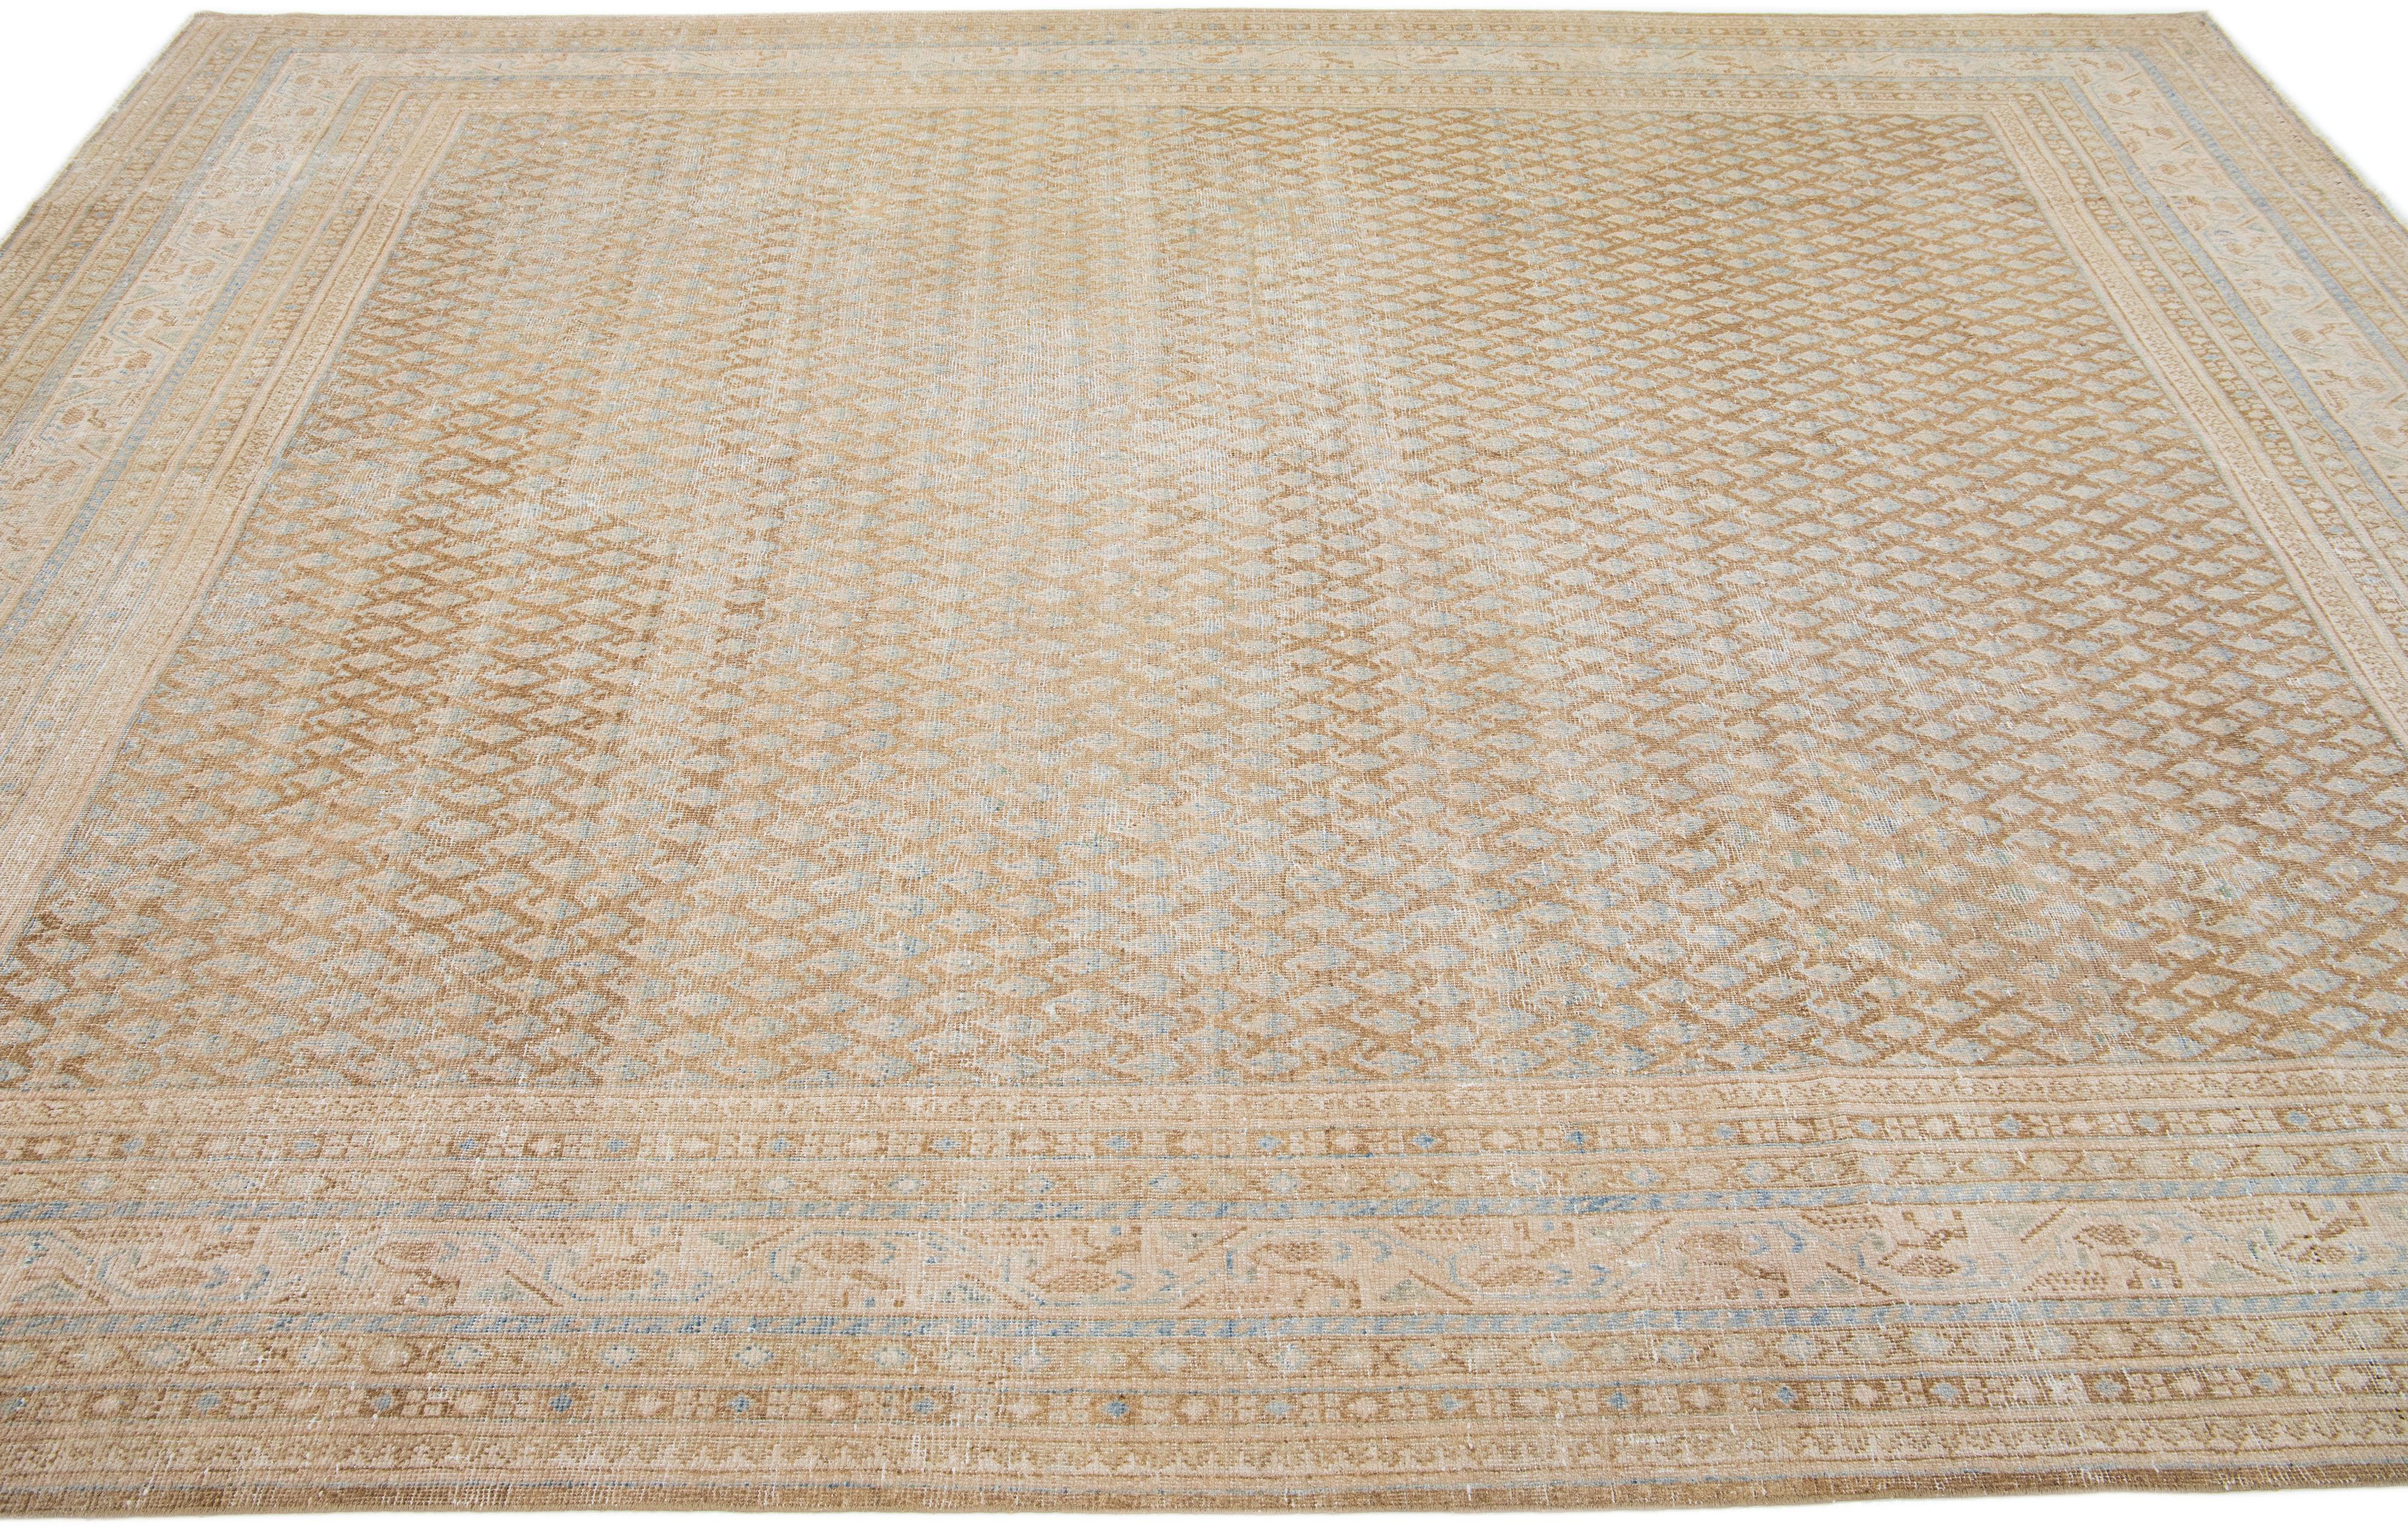 Persian Beige Handmade Antique Hamadan Wool Rug with Allover Design For Sale